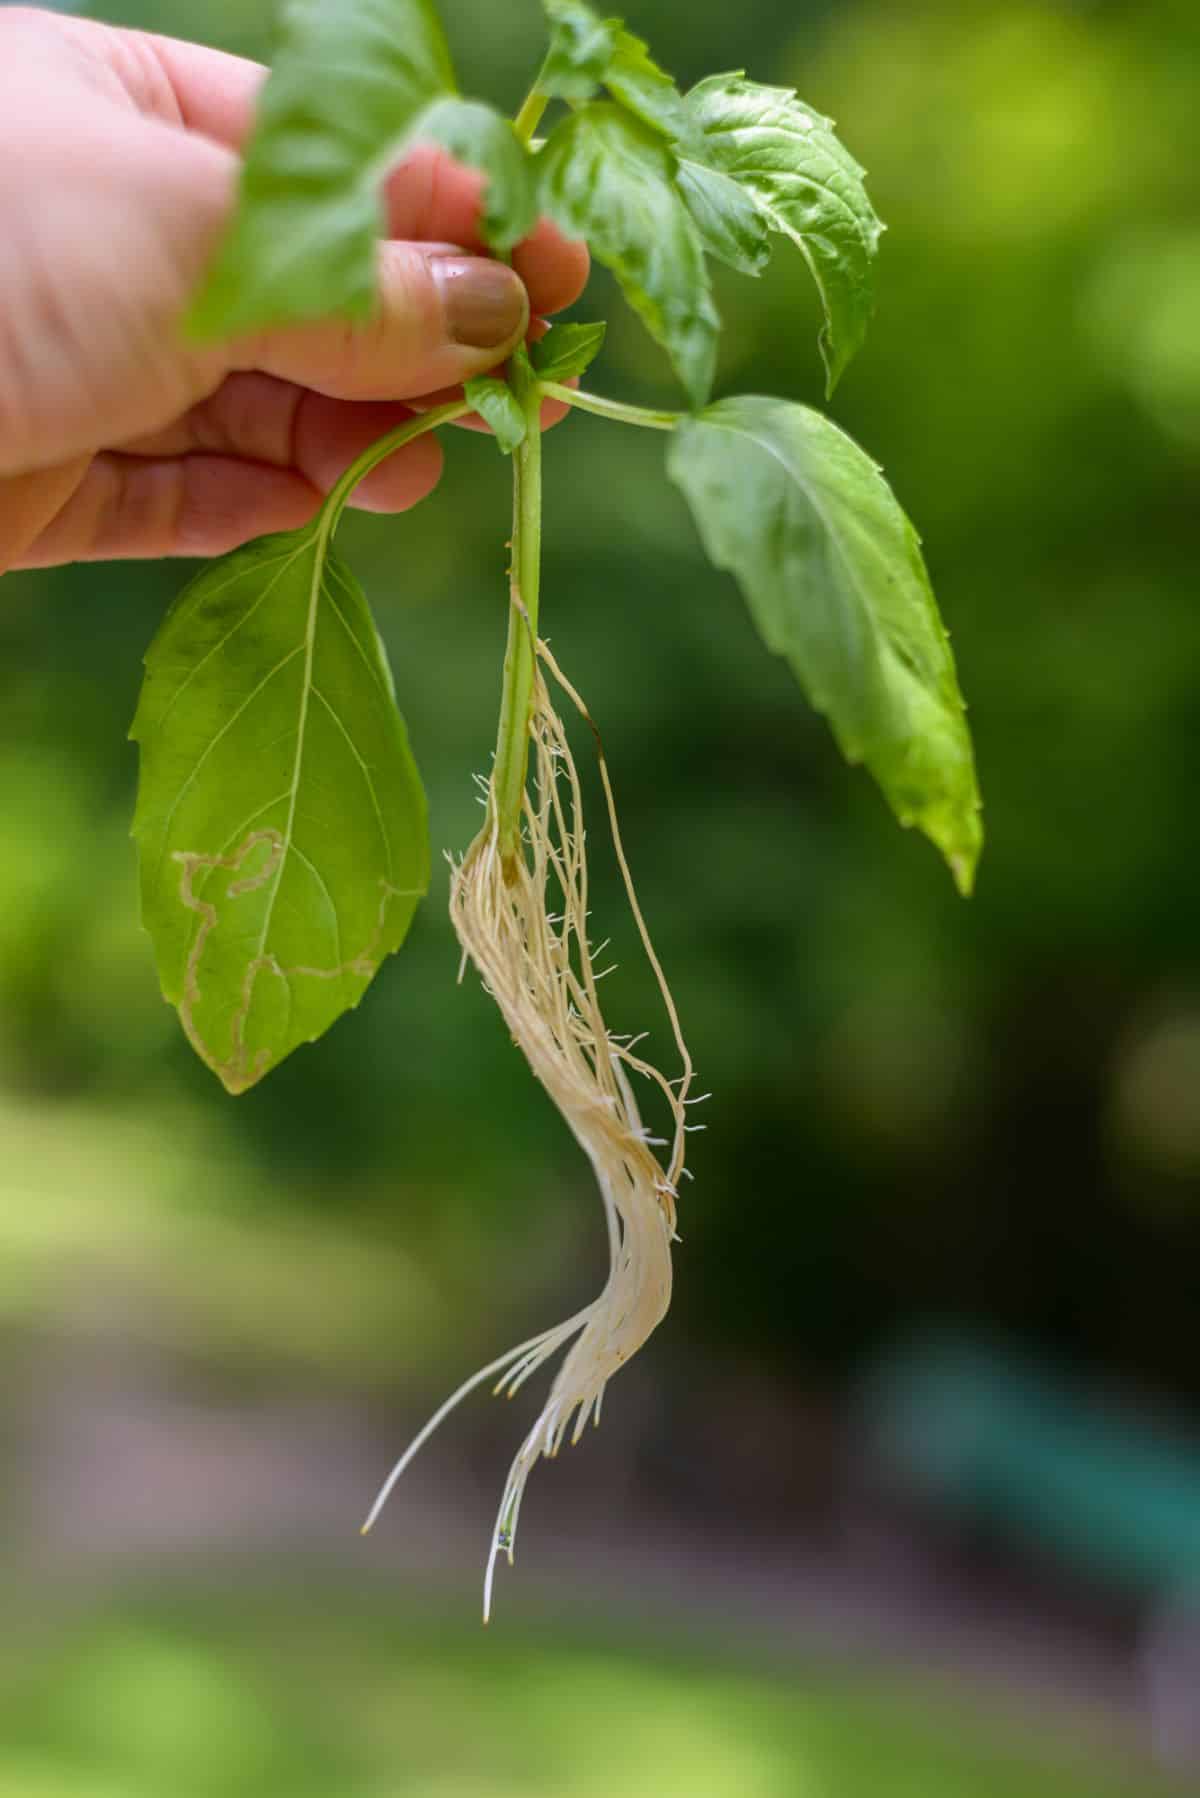 Roots on a propagated herb stem